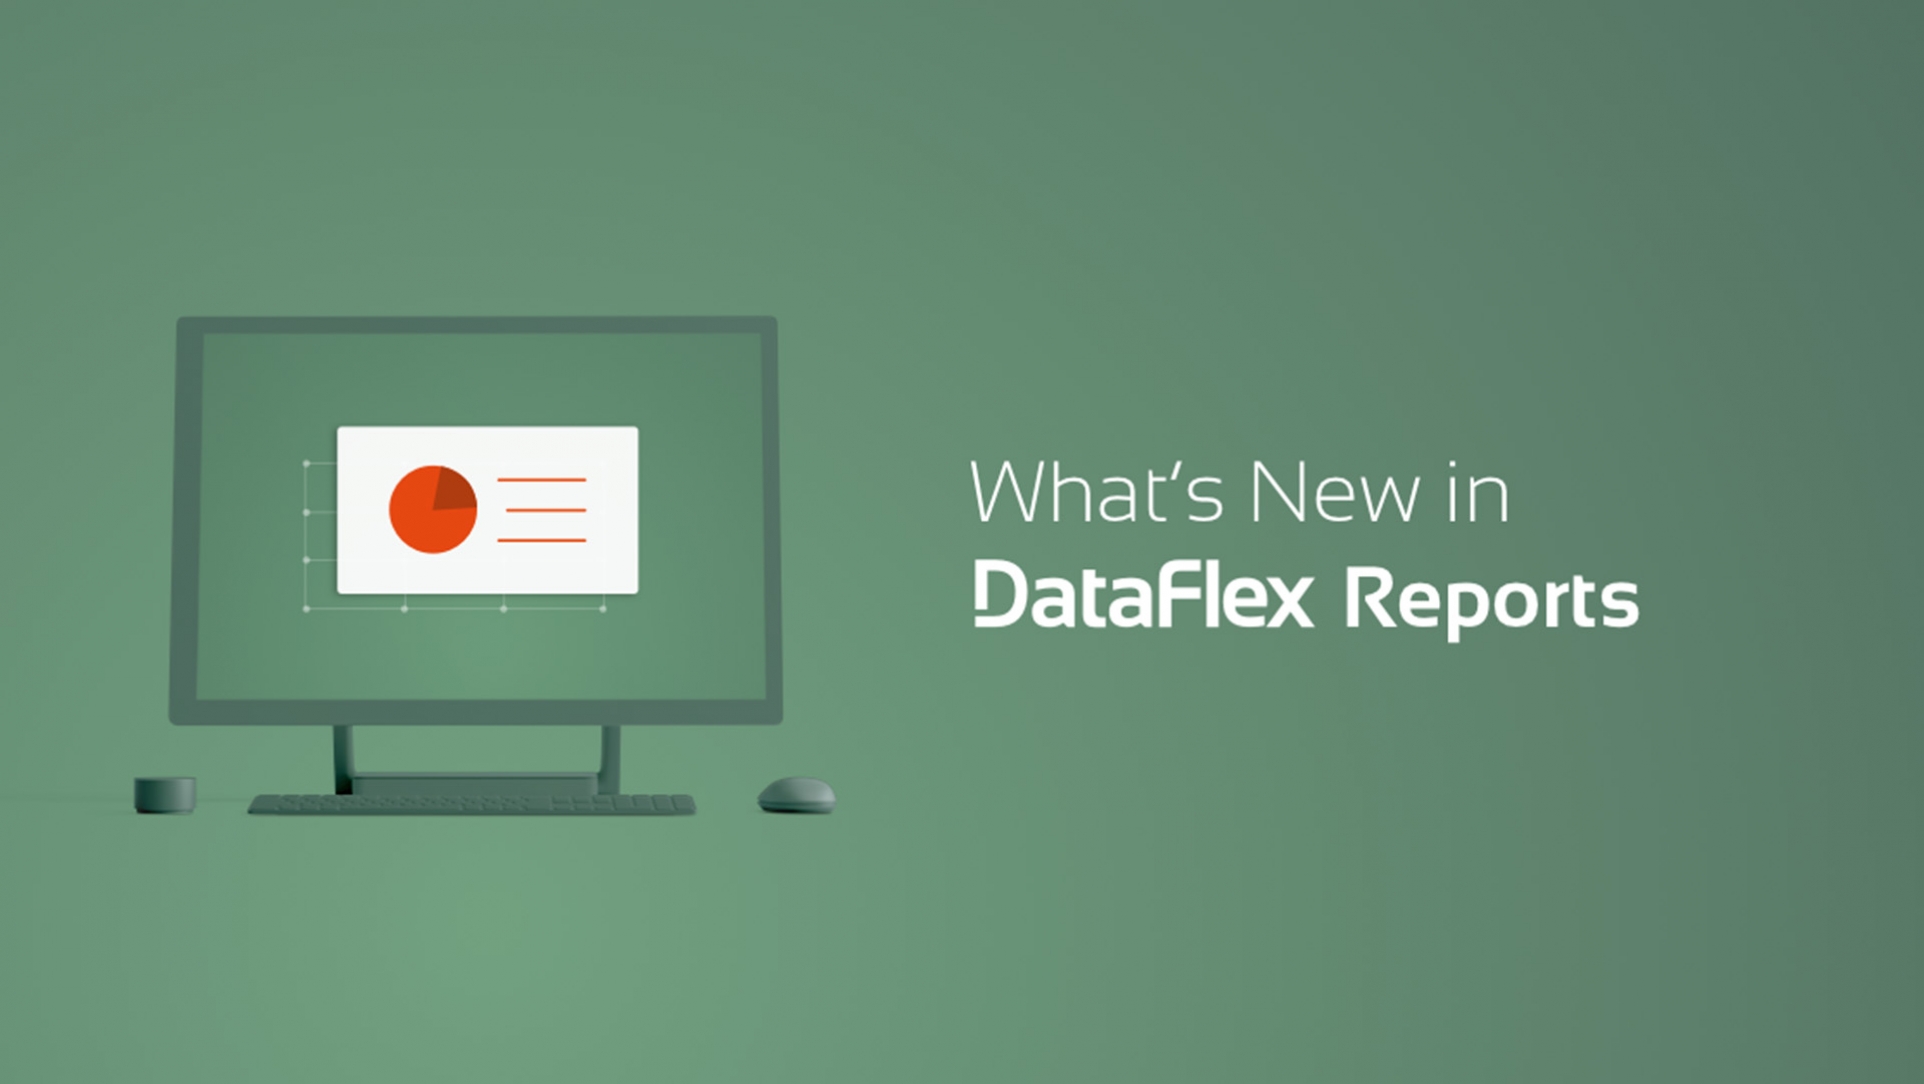 What’s New in DataFlex Reports